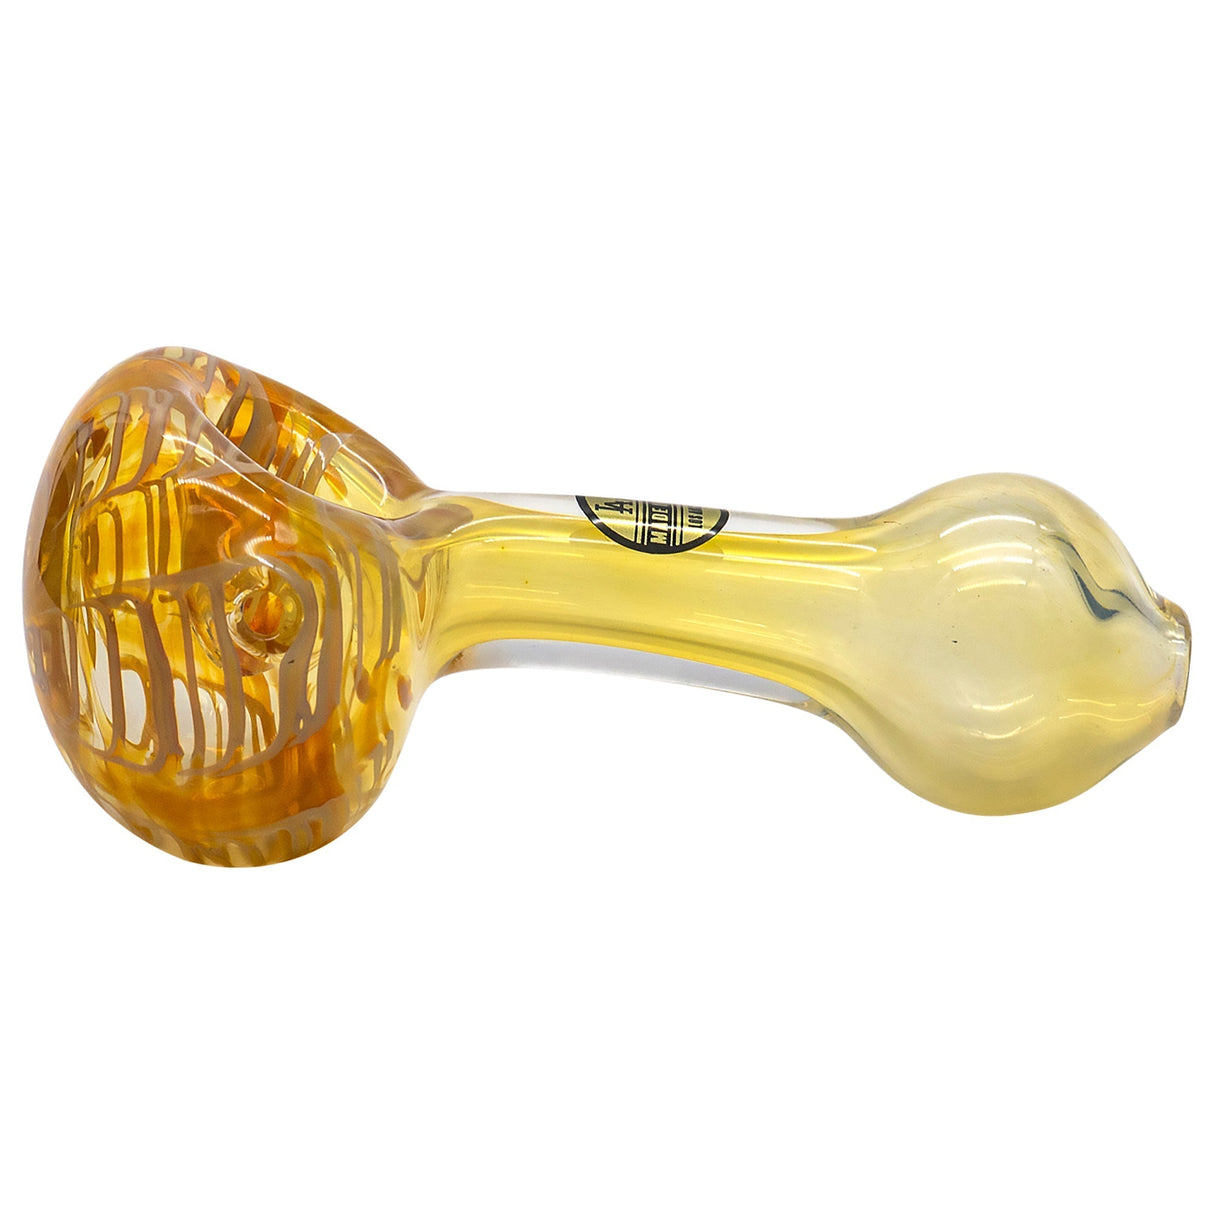 LA Pipes Color Changing Fumed Glass Hand-Pipe with Yellow Accents, Side View